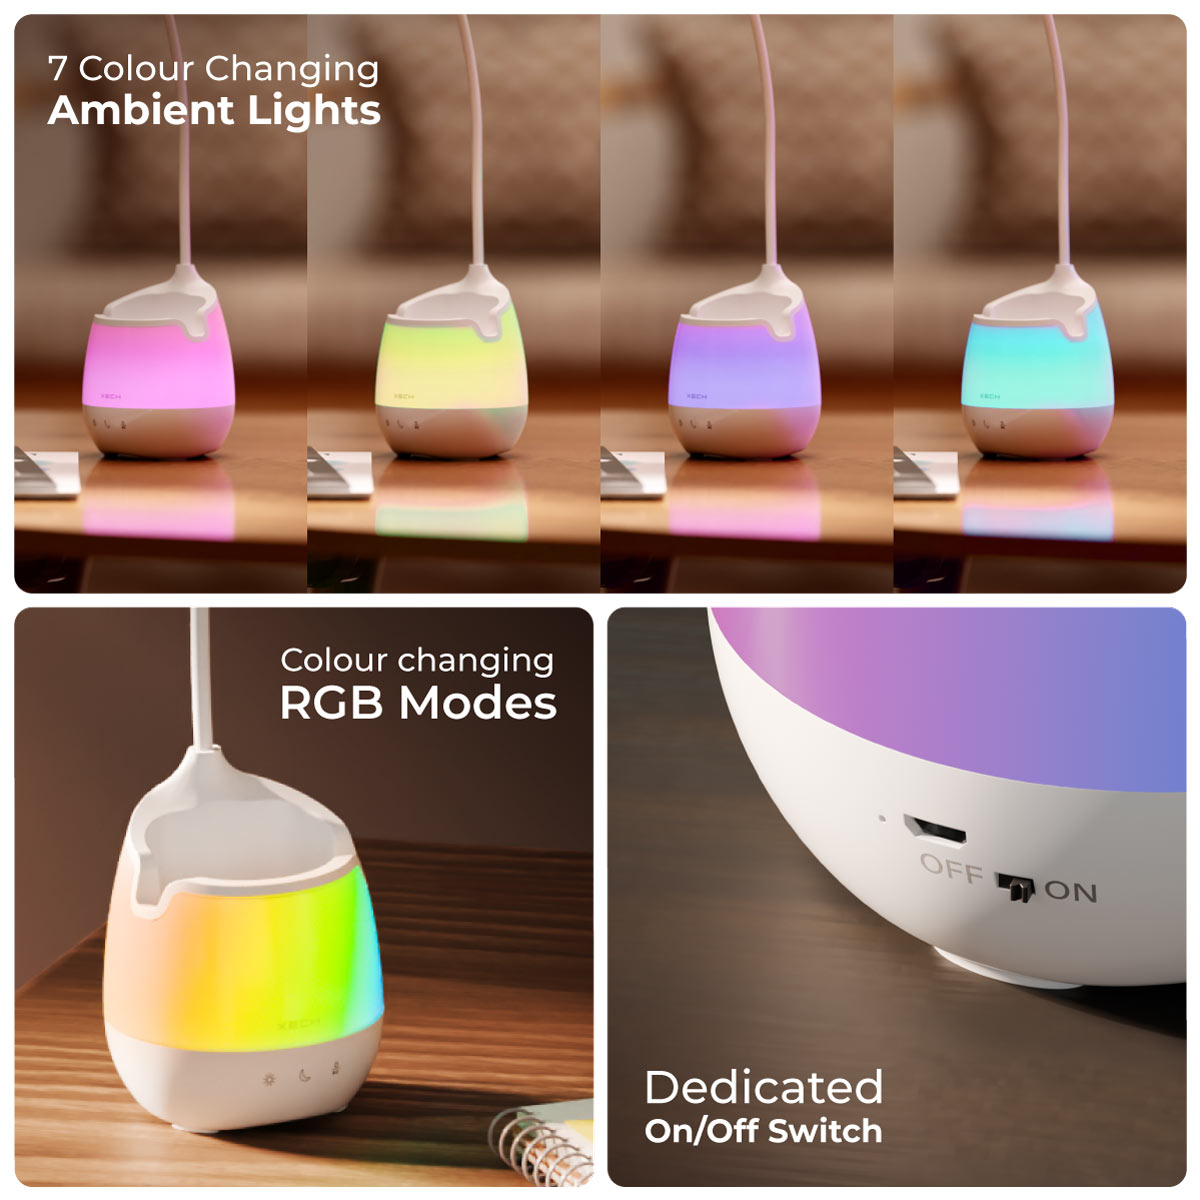 xech table lamp with mood lighting colour changing rgb lights lumos x study lamp